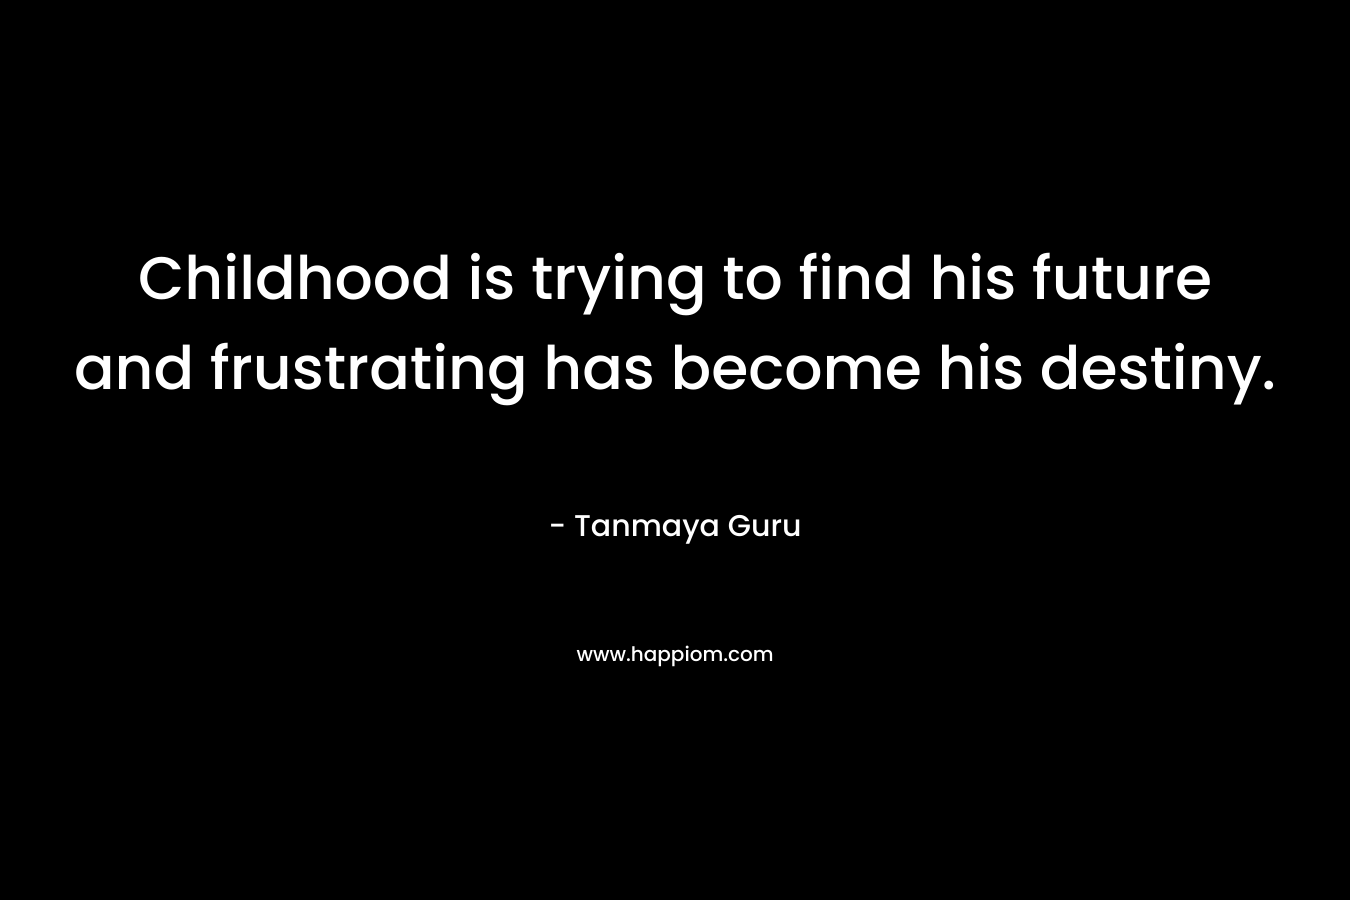 Childhood is trying to find his future and frustrating has become his destiny.